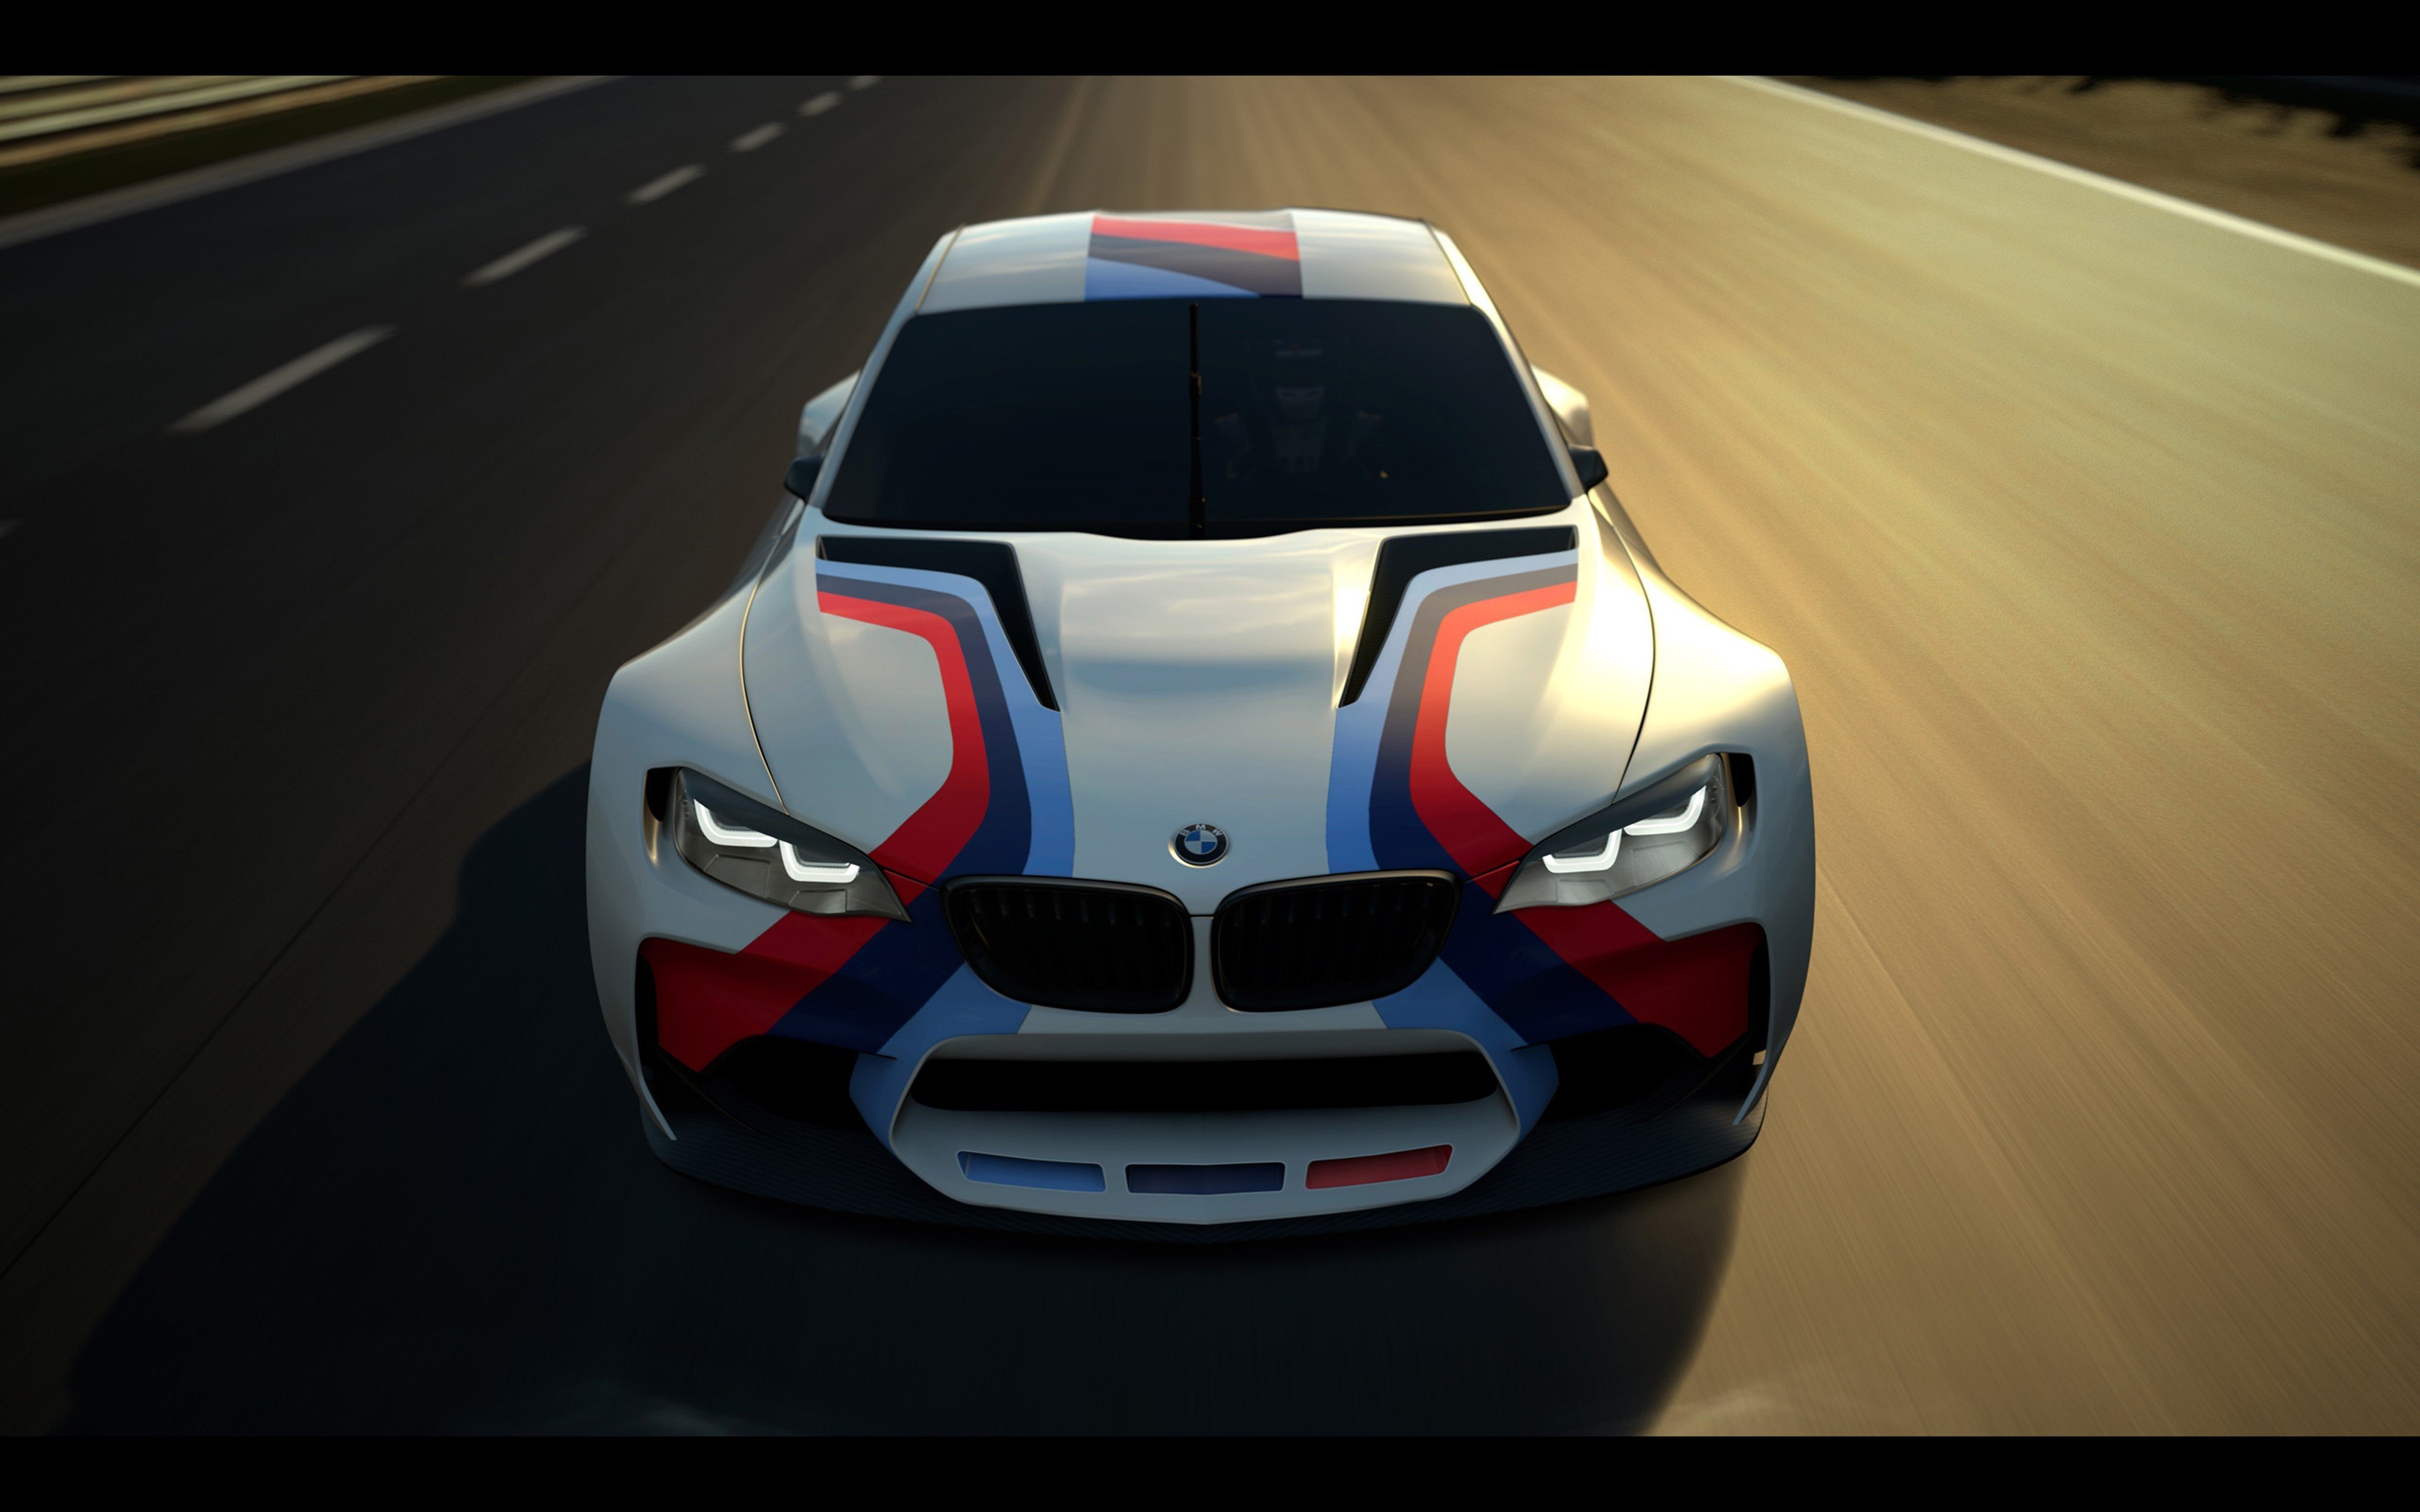 2014, Bmw, Vision, Gran turismo, Concept, Race, Car, Game, Vehicle, Racing, Germany, 4000x2500,  6 Wallpaper